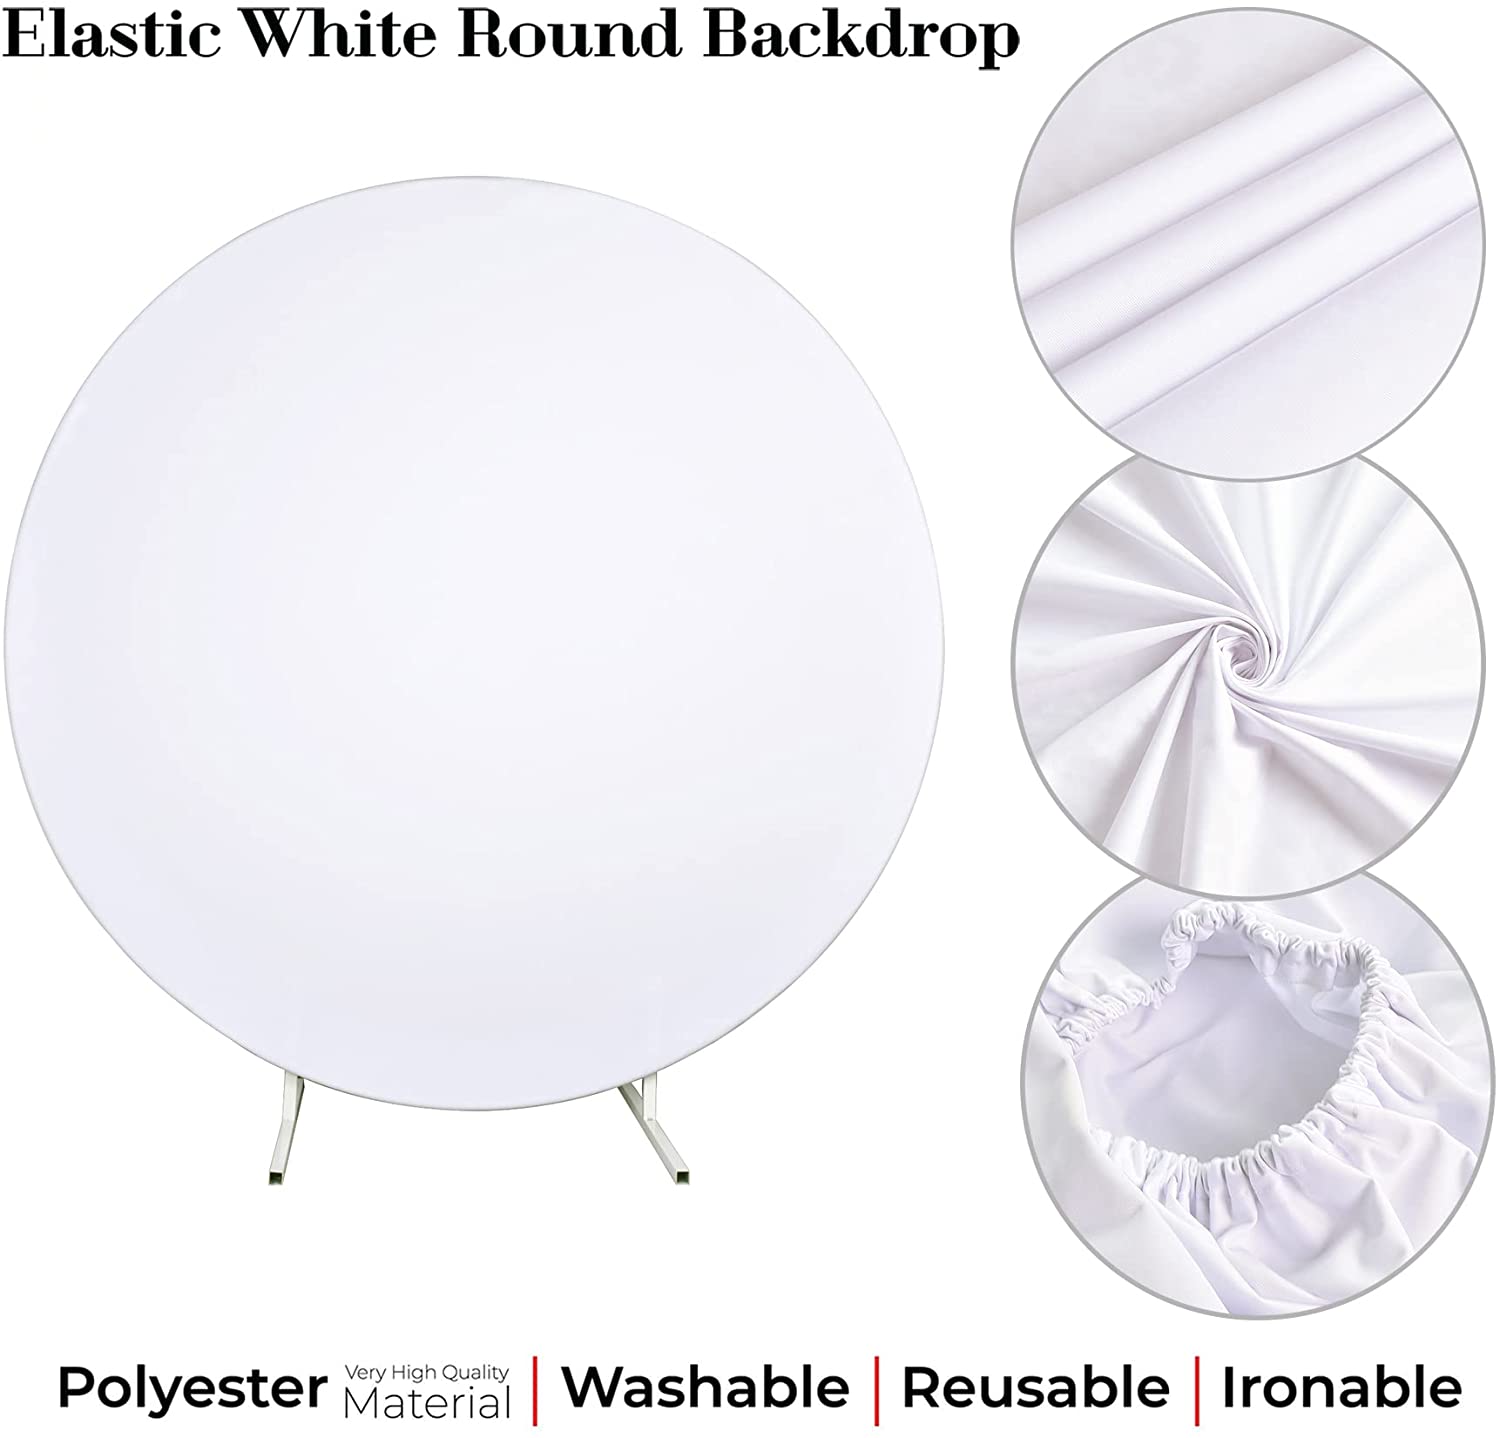 round backdrop polyester